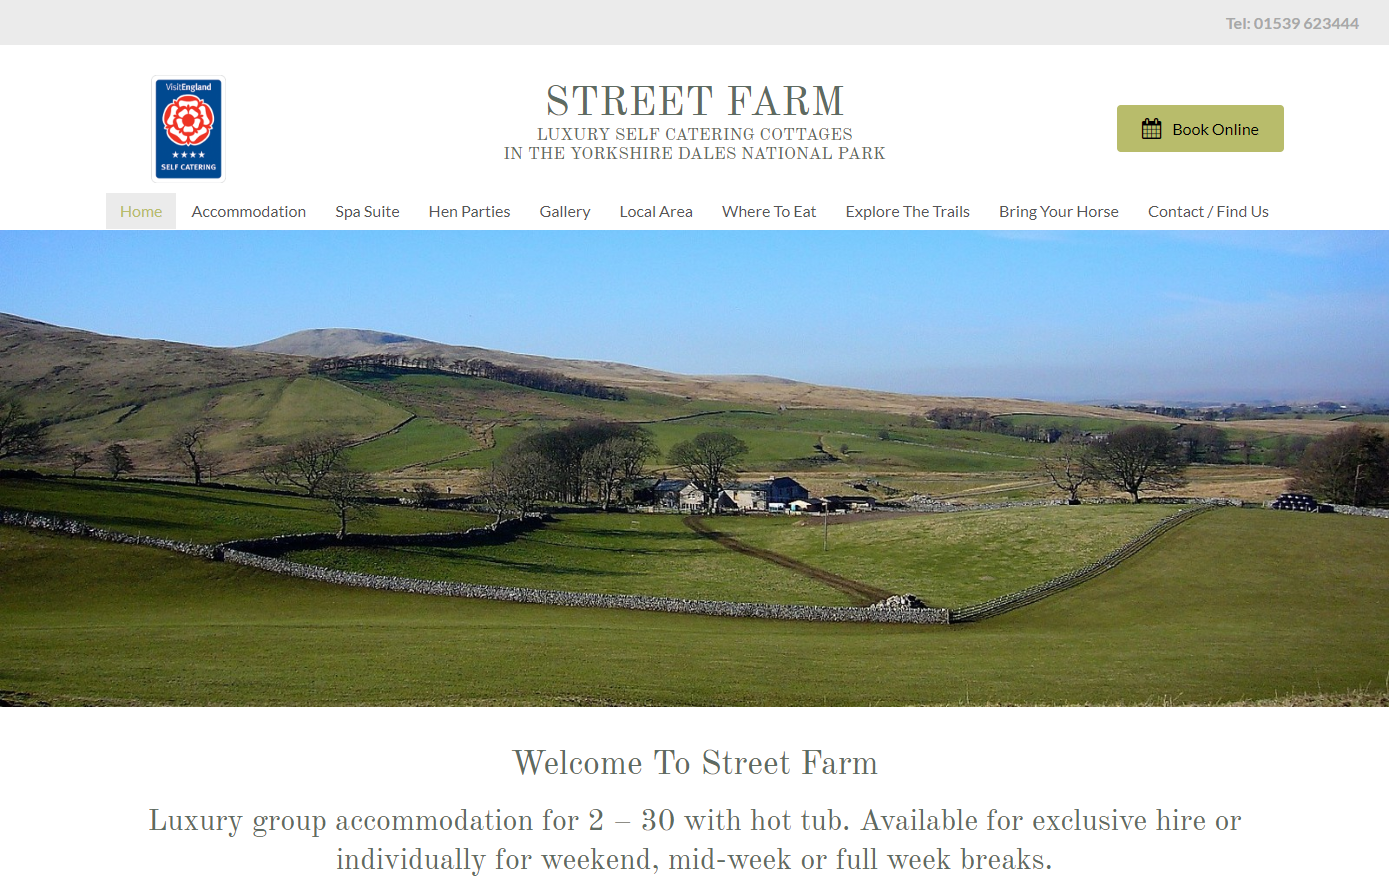 Street Farm (Self Catering) - Yorkshire Dales